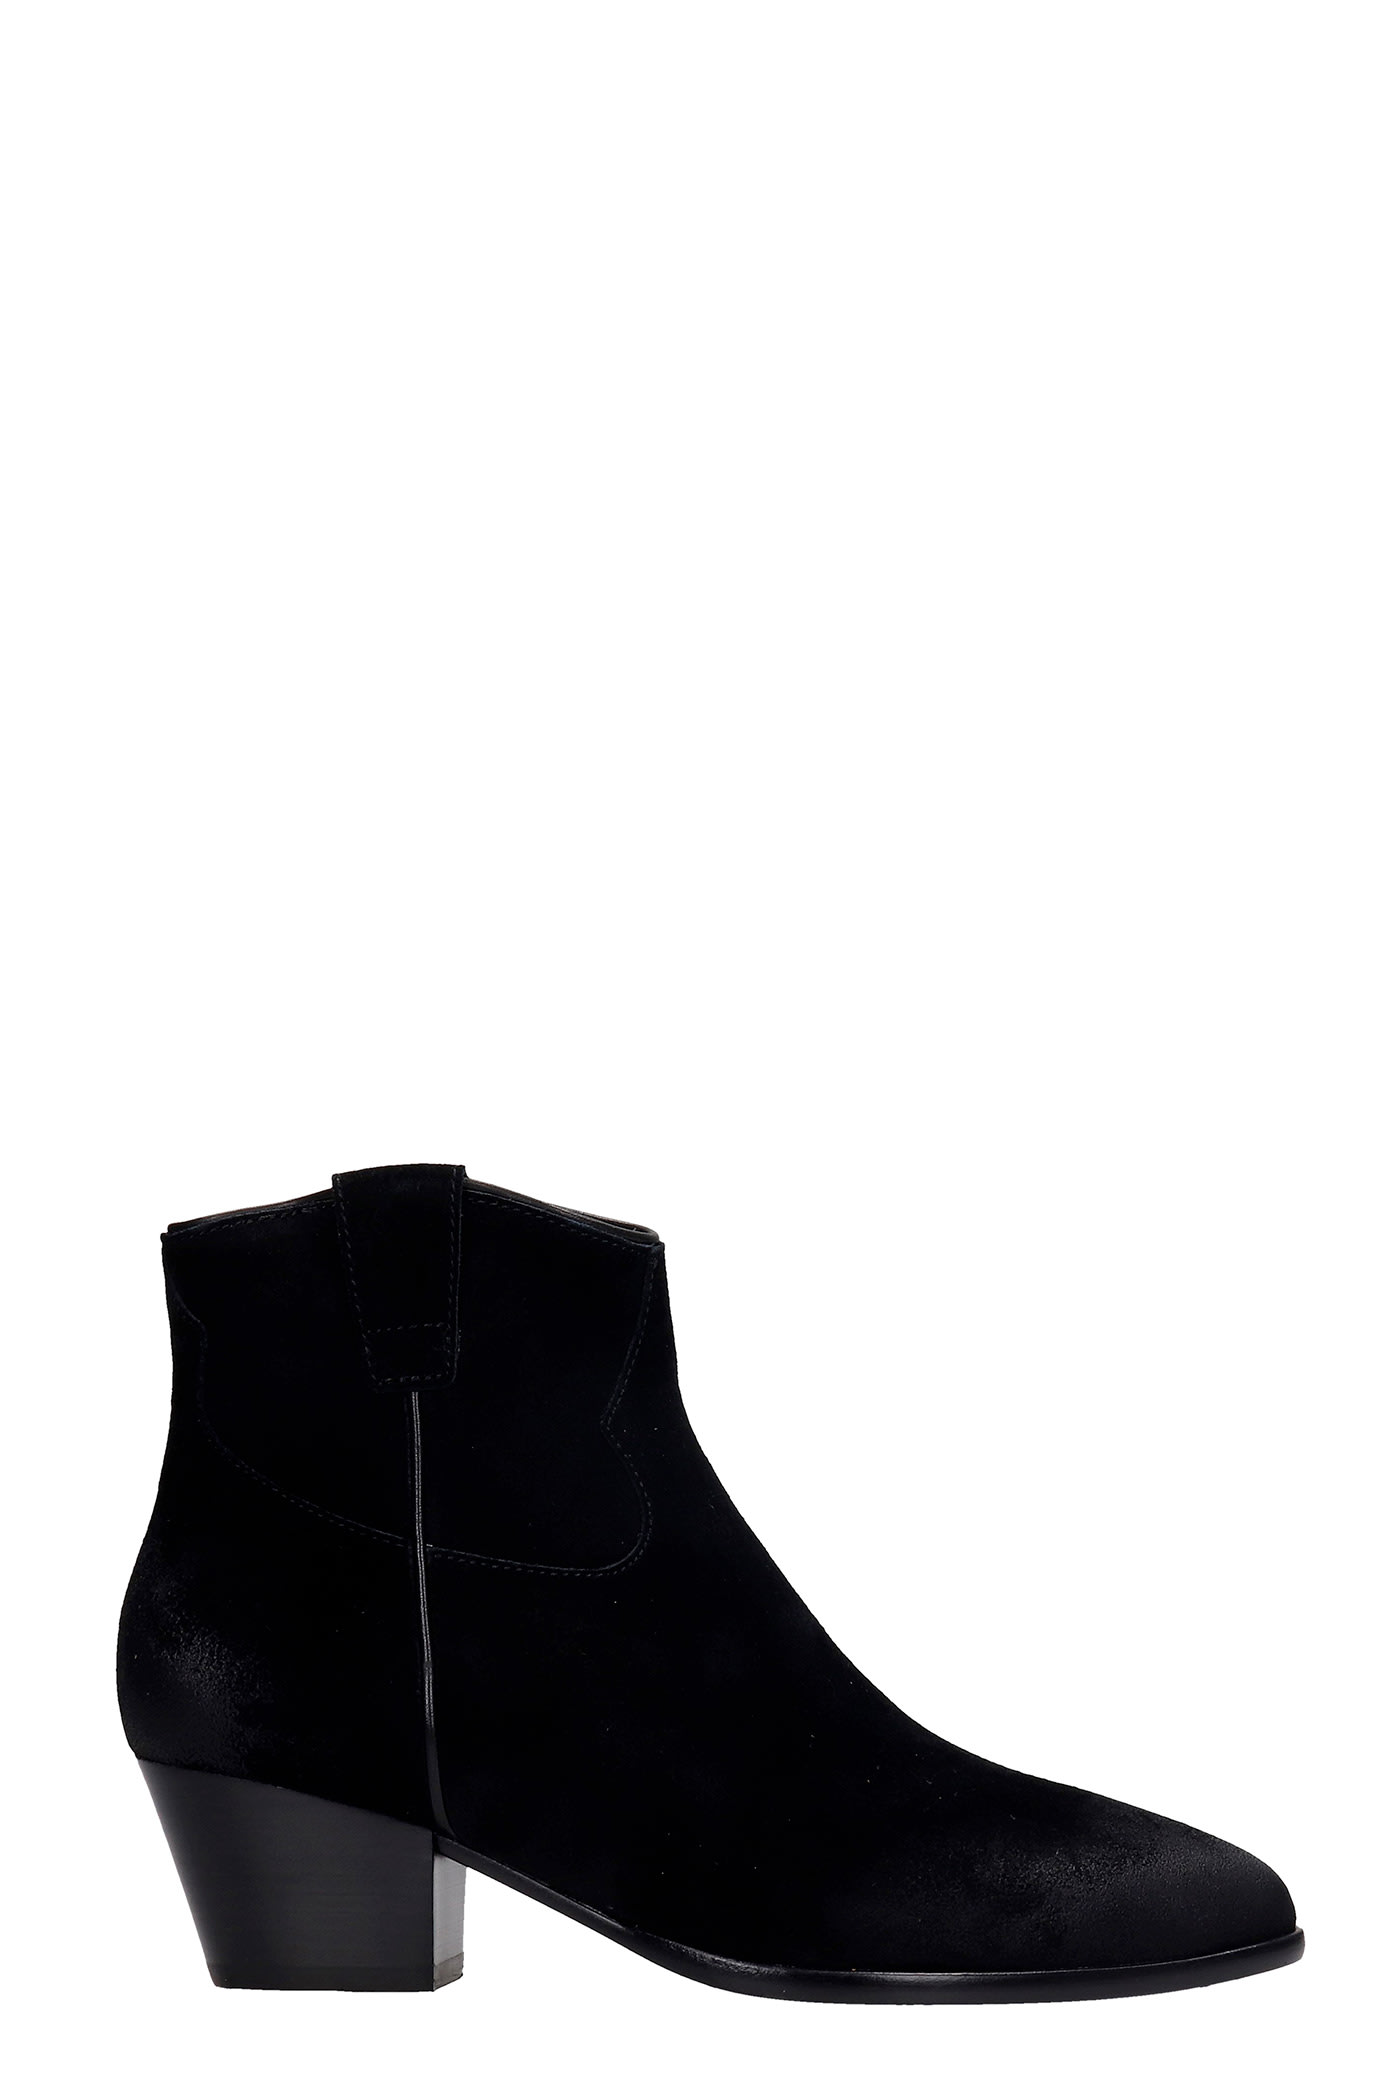 Ash Houston 02 Texan Ankle Boots In Black Suede